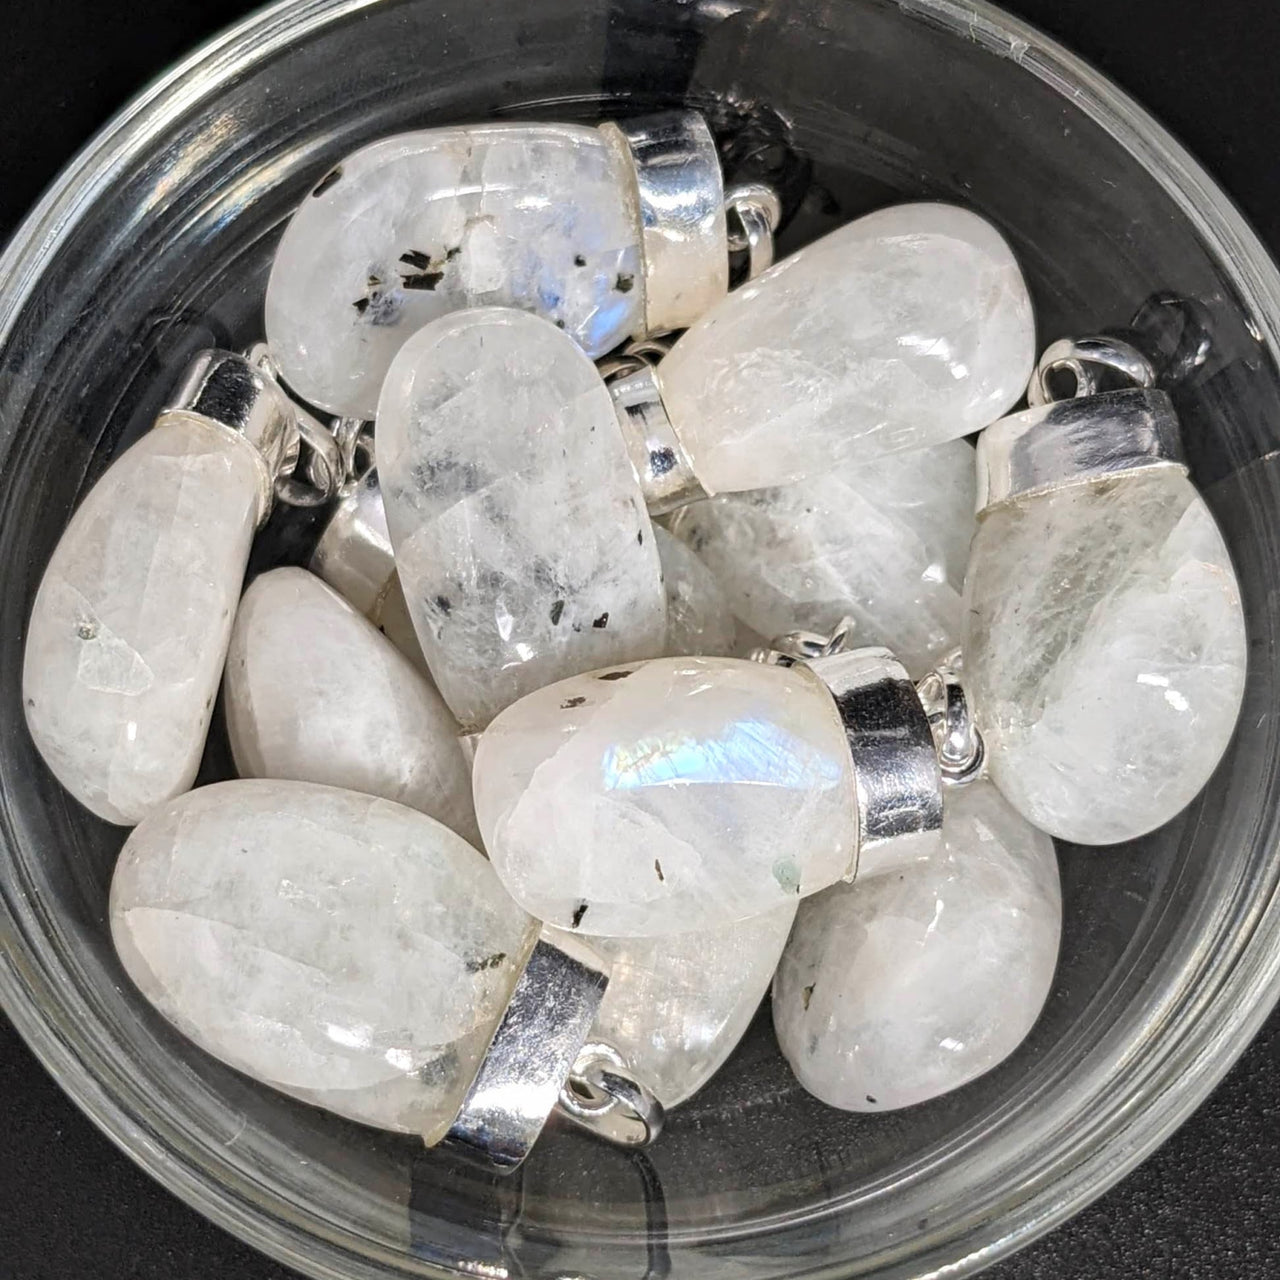 A bowl filled with white crystals for 1 Rainbow Moonstone AAA Tumbled Pendant SK6874